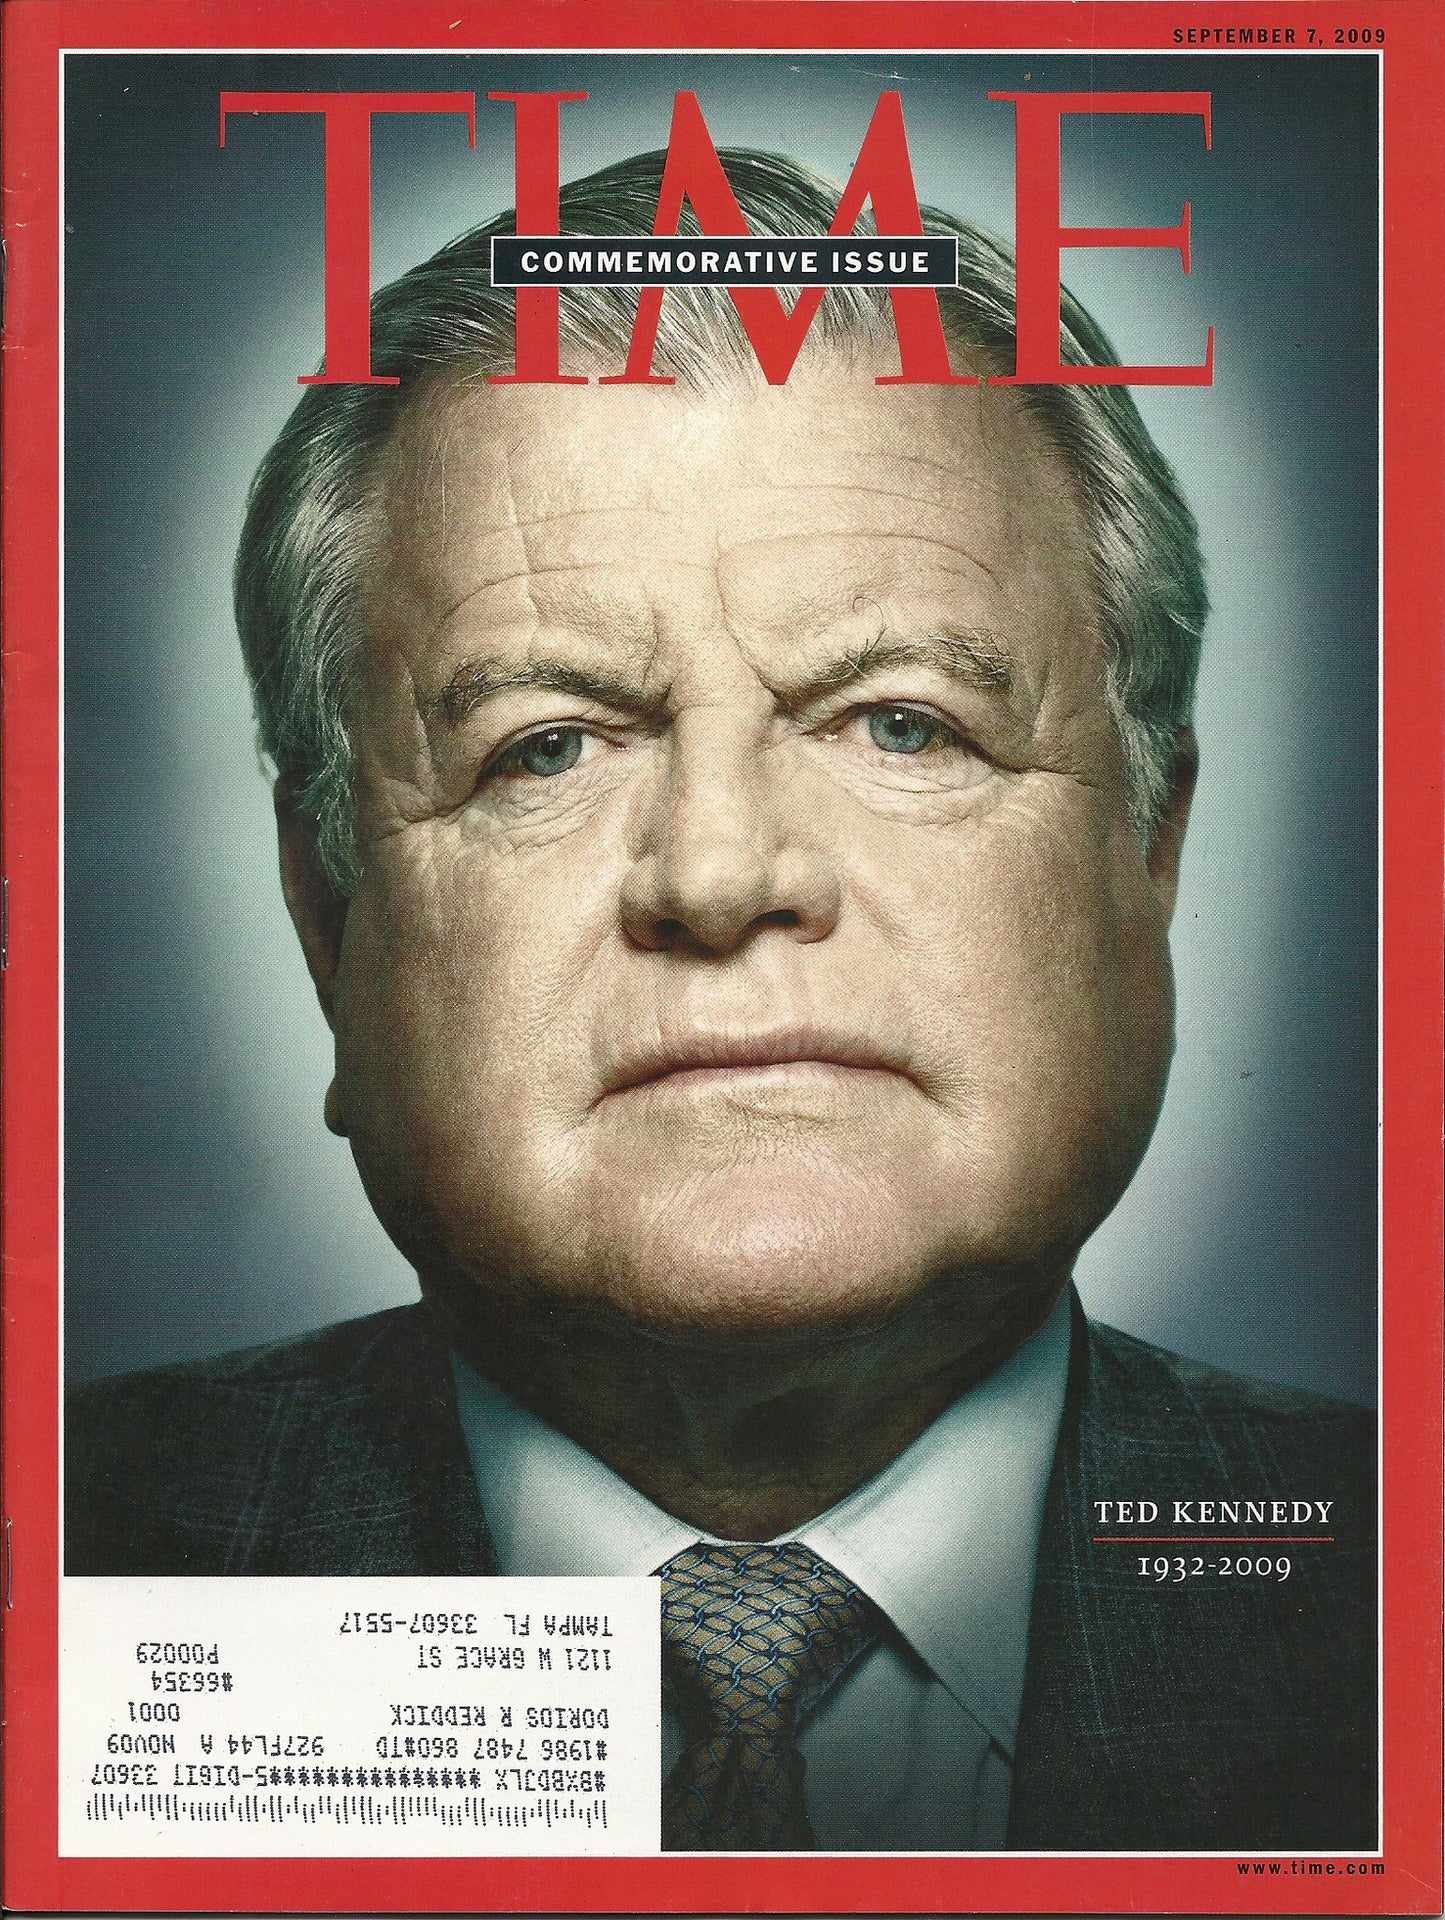 09 07 2009 Time Ted Kennedy